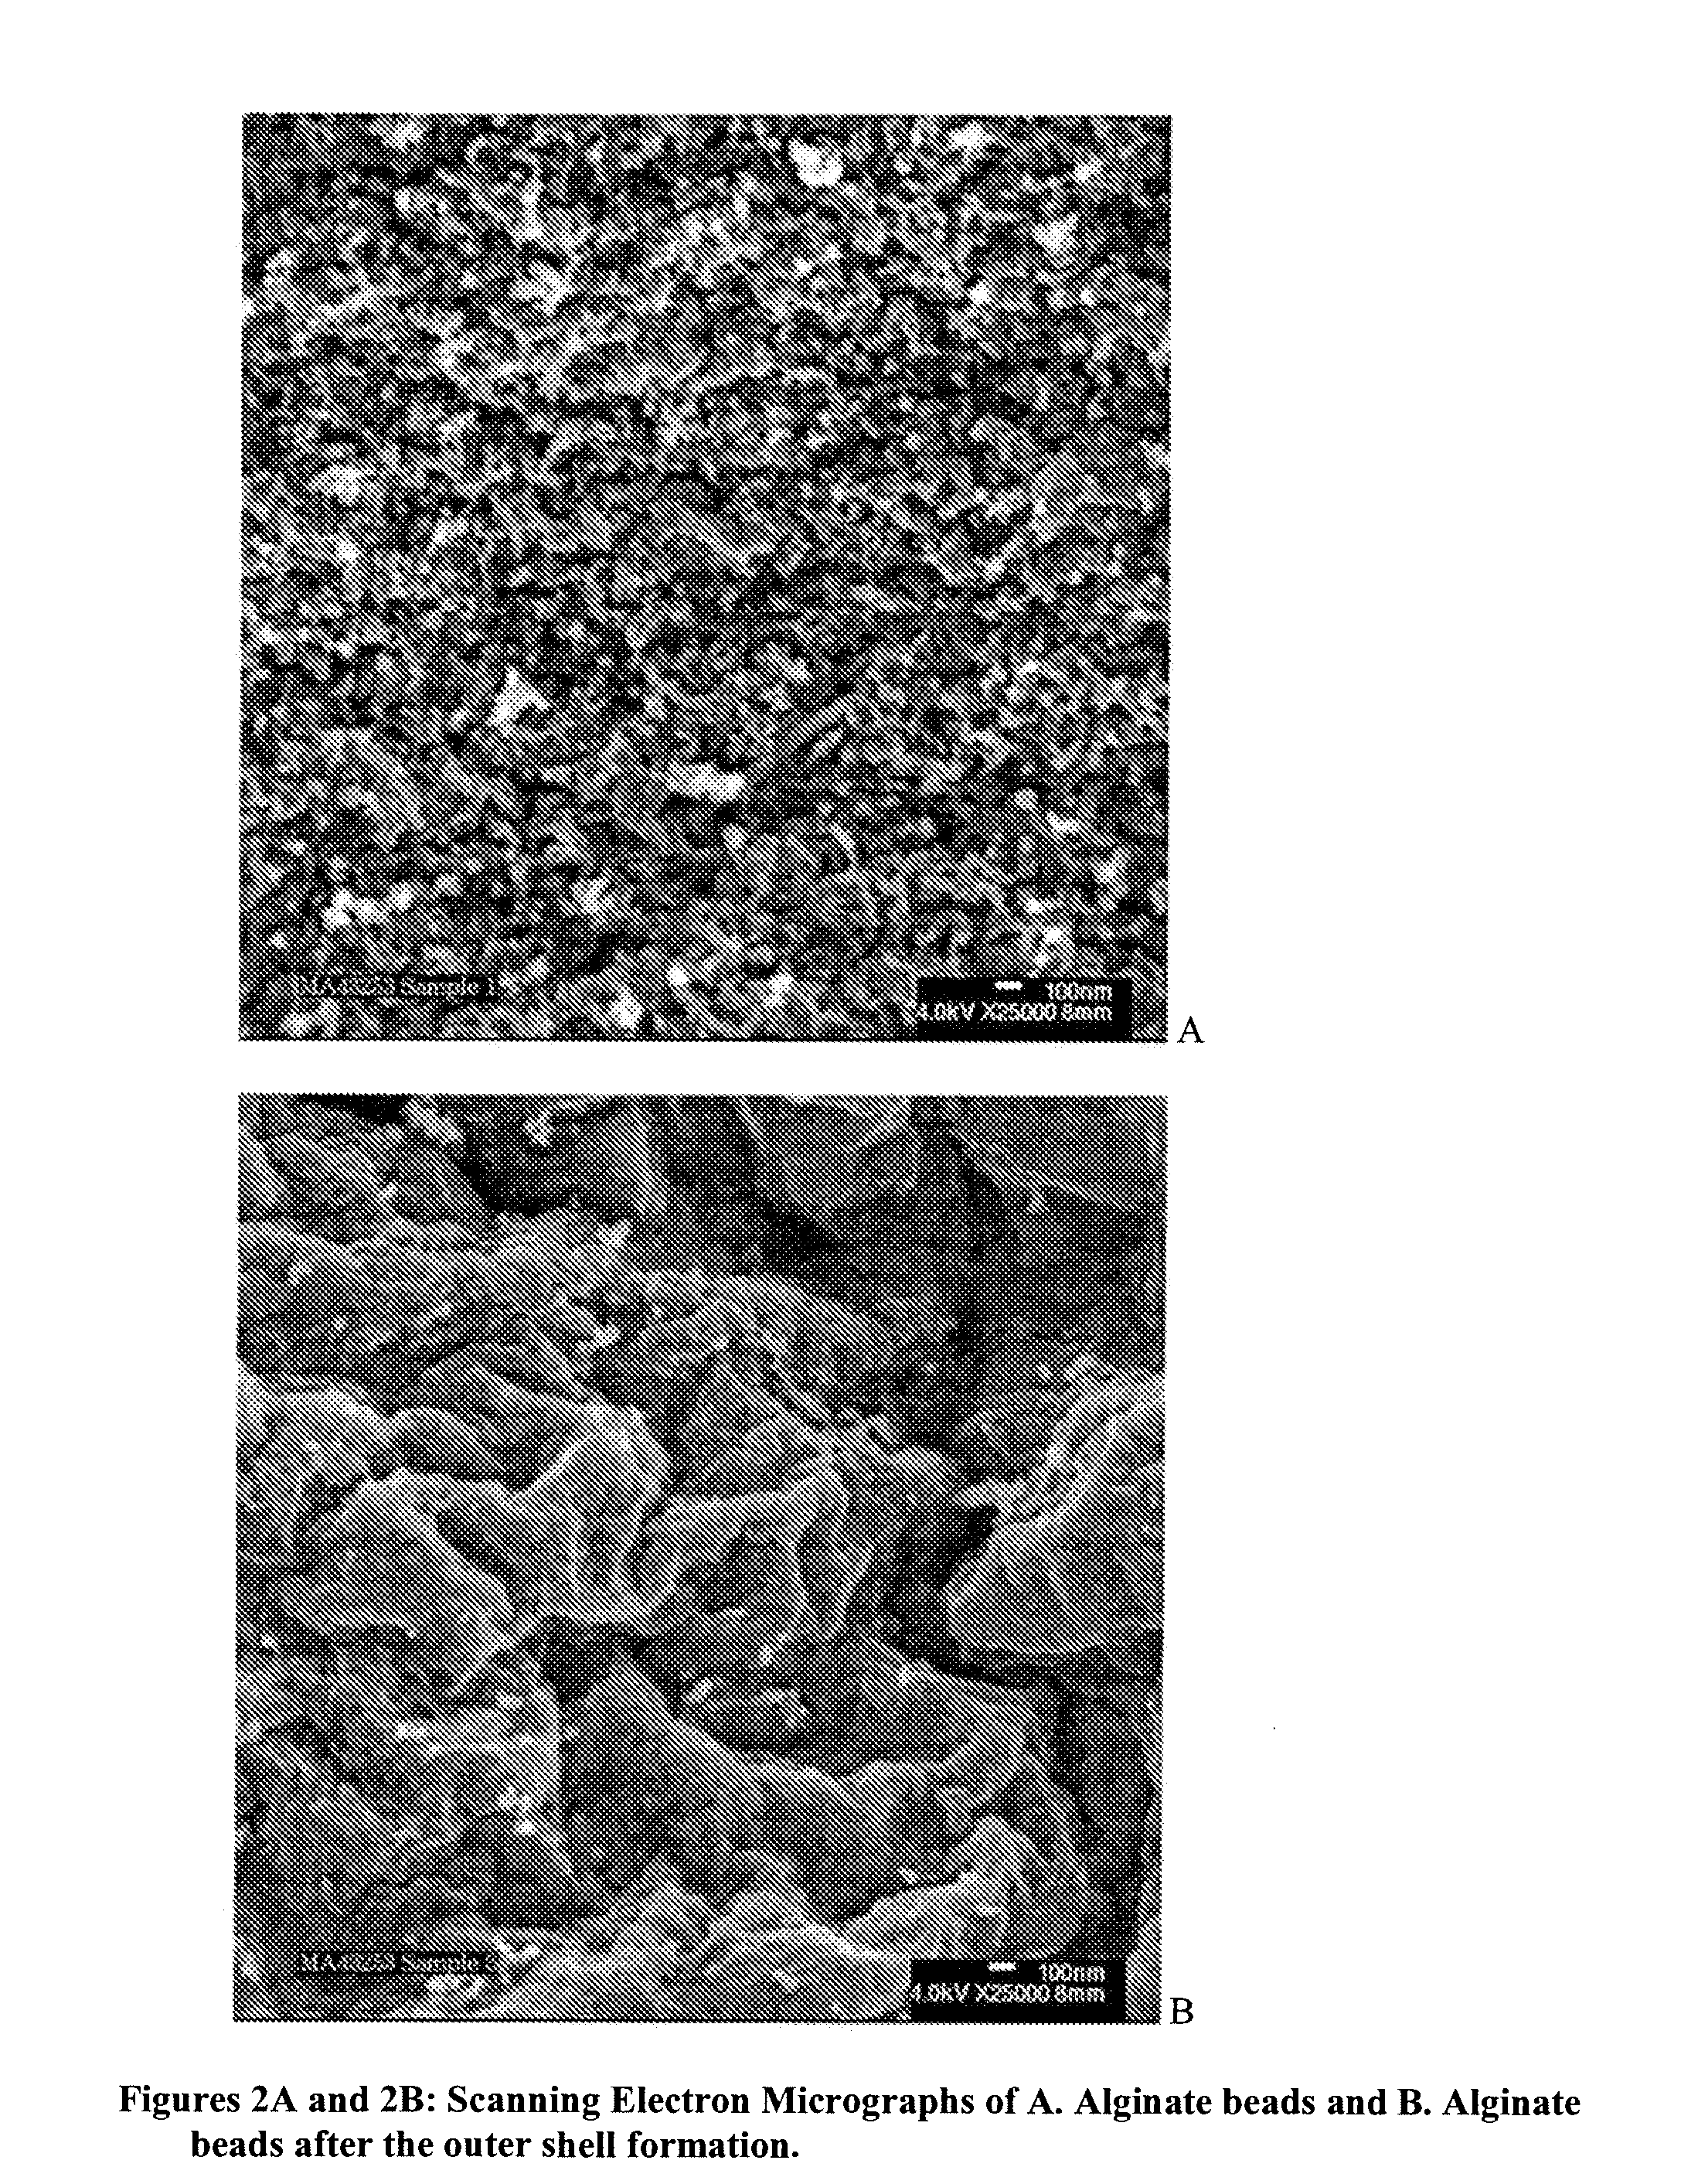 Multilayered polyelectrolyte-based capsules for cell encapsulation and delivery of therapeutic compositions